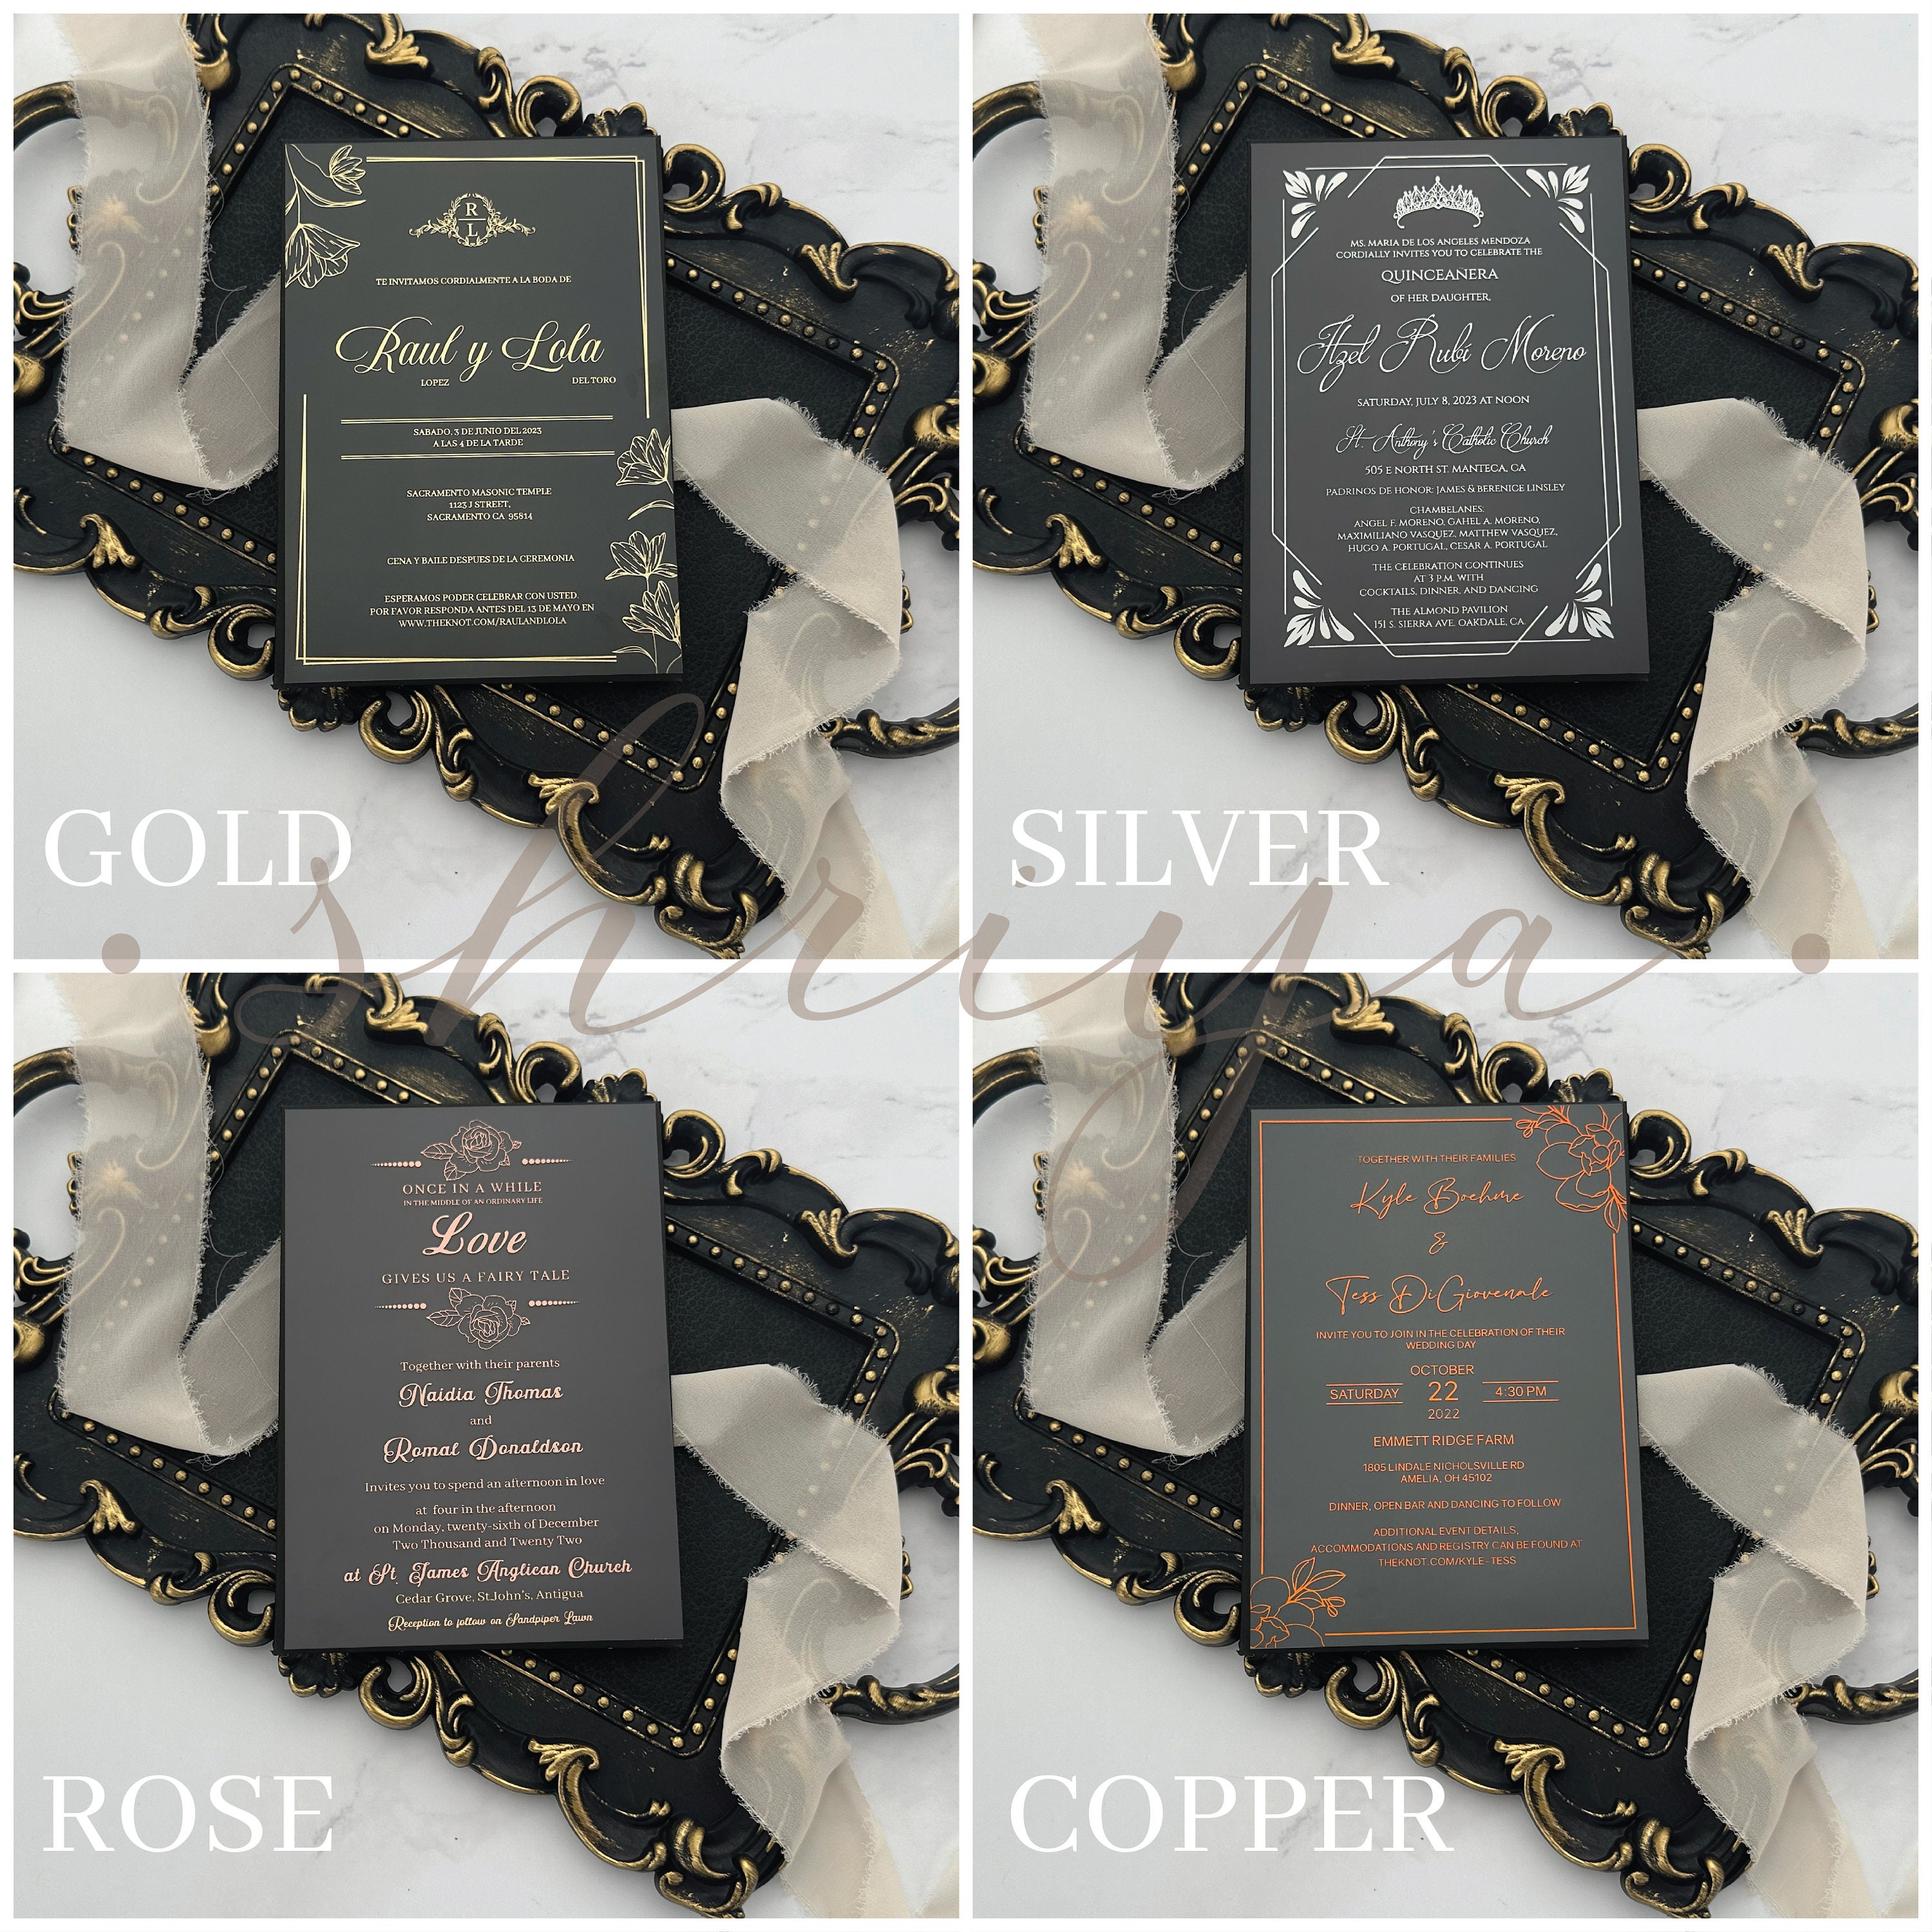 Gold Foil Printed Acrylic Wedding Invitation with Black Envelope